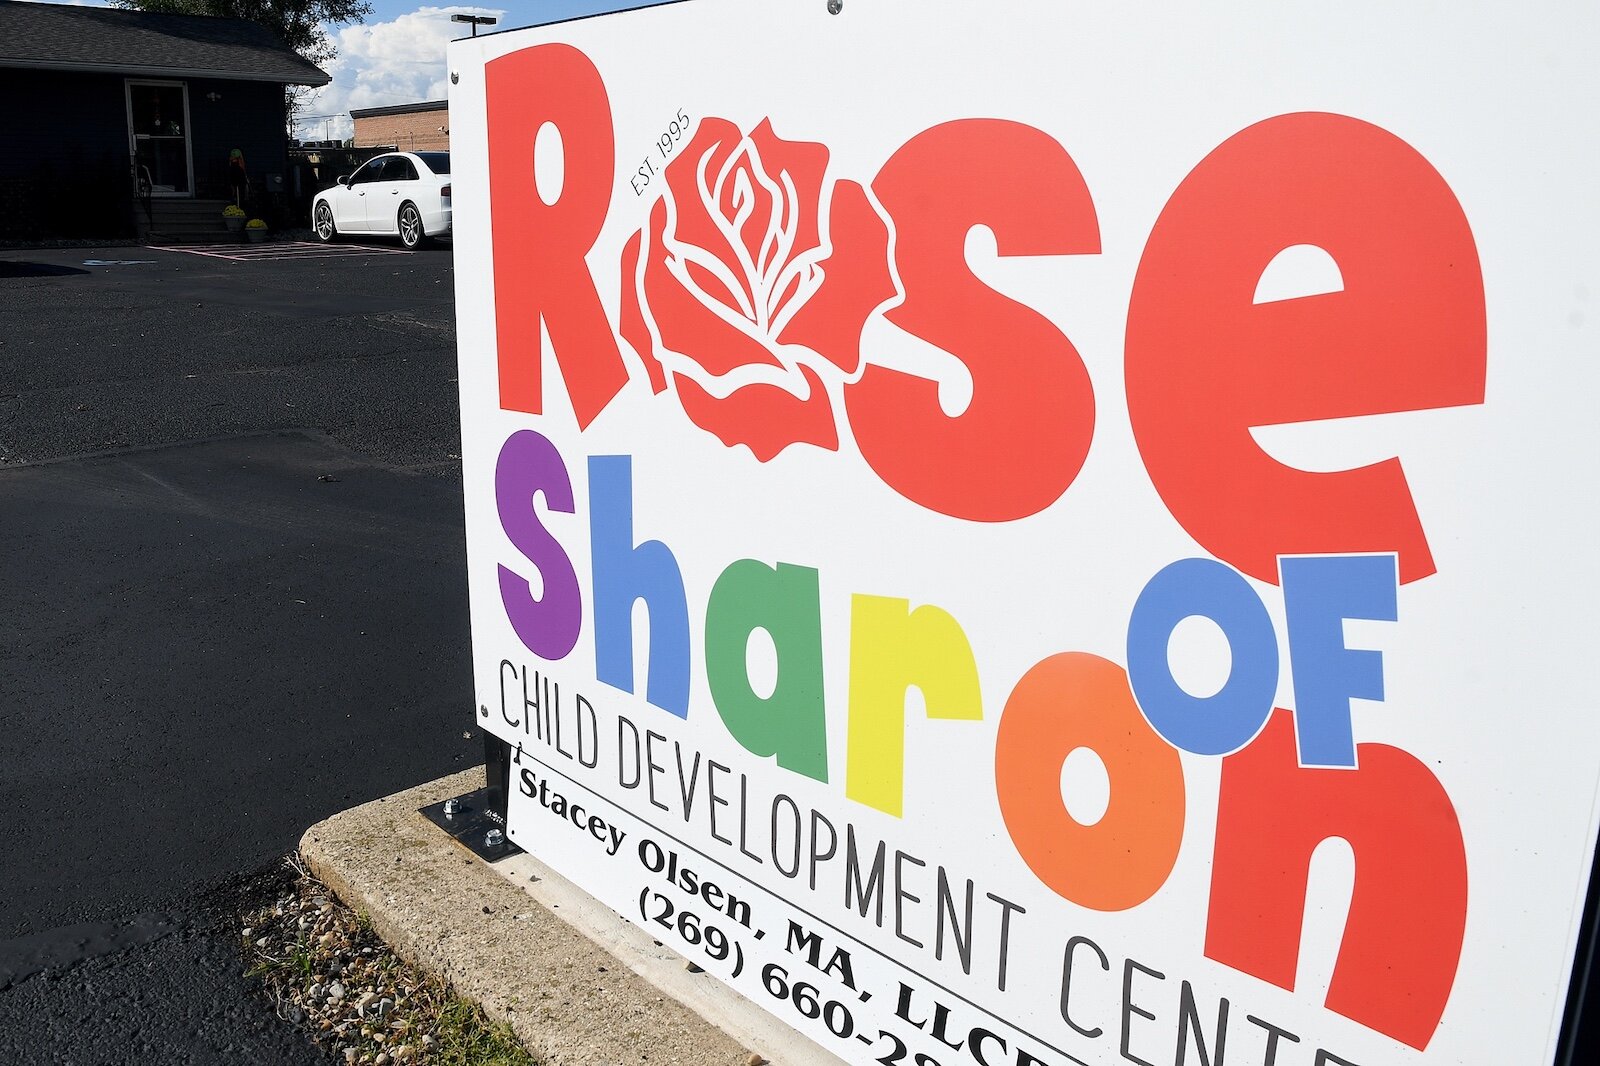 The Rose of Sharon Child Development Center on Woodrow Avenue South in Battle Creek.